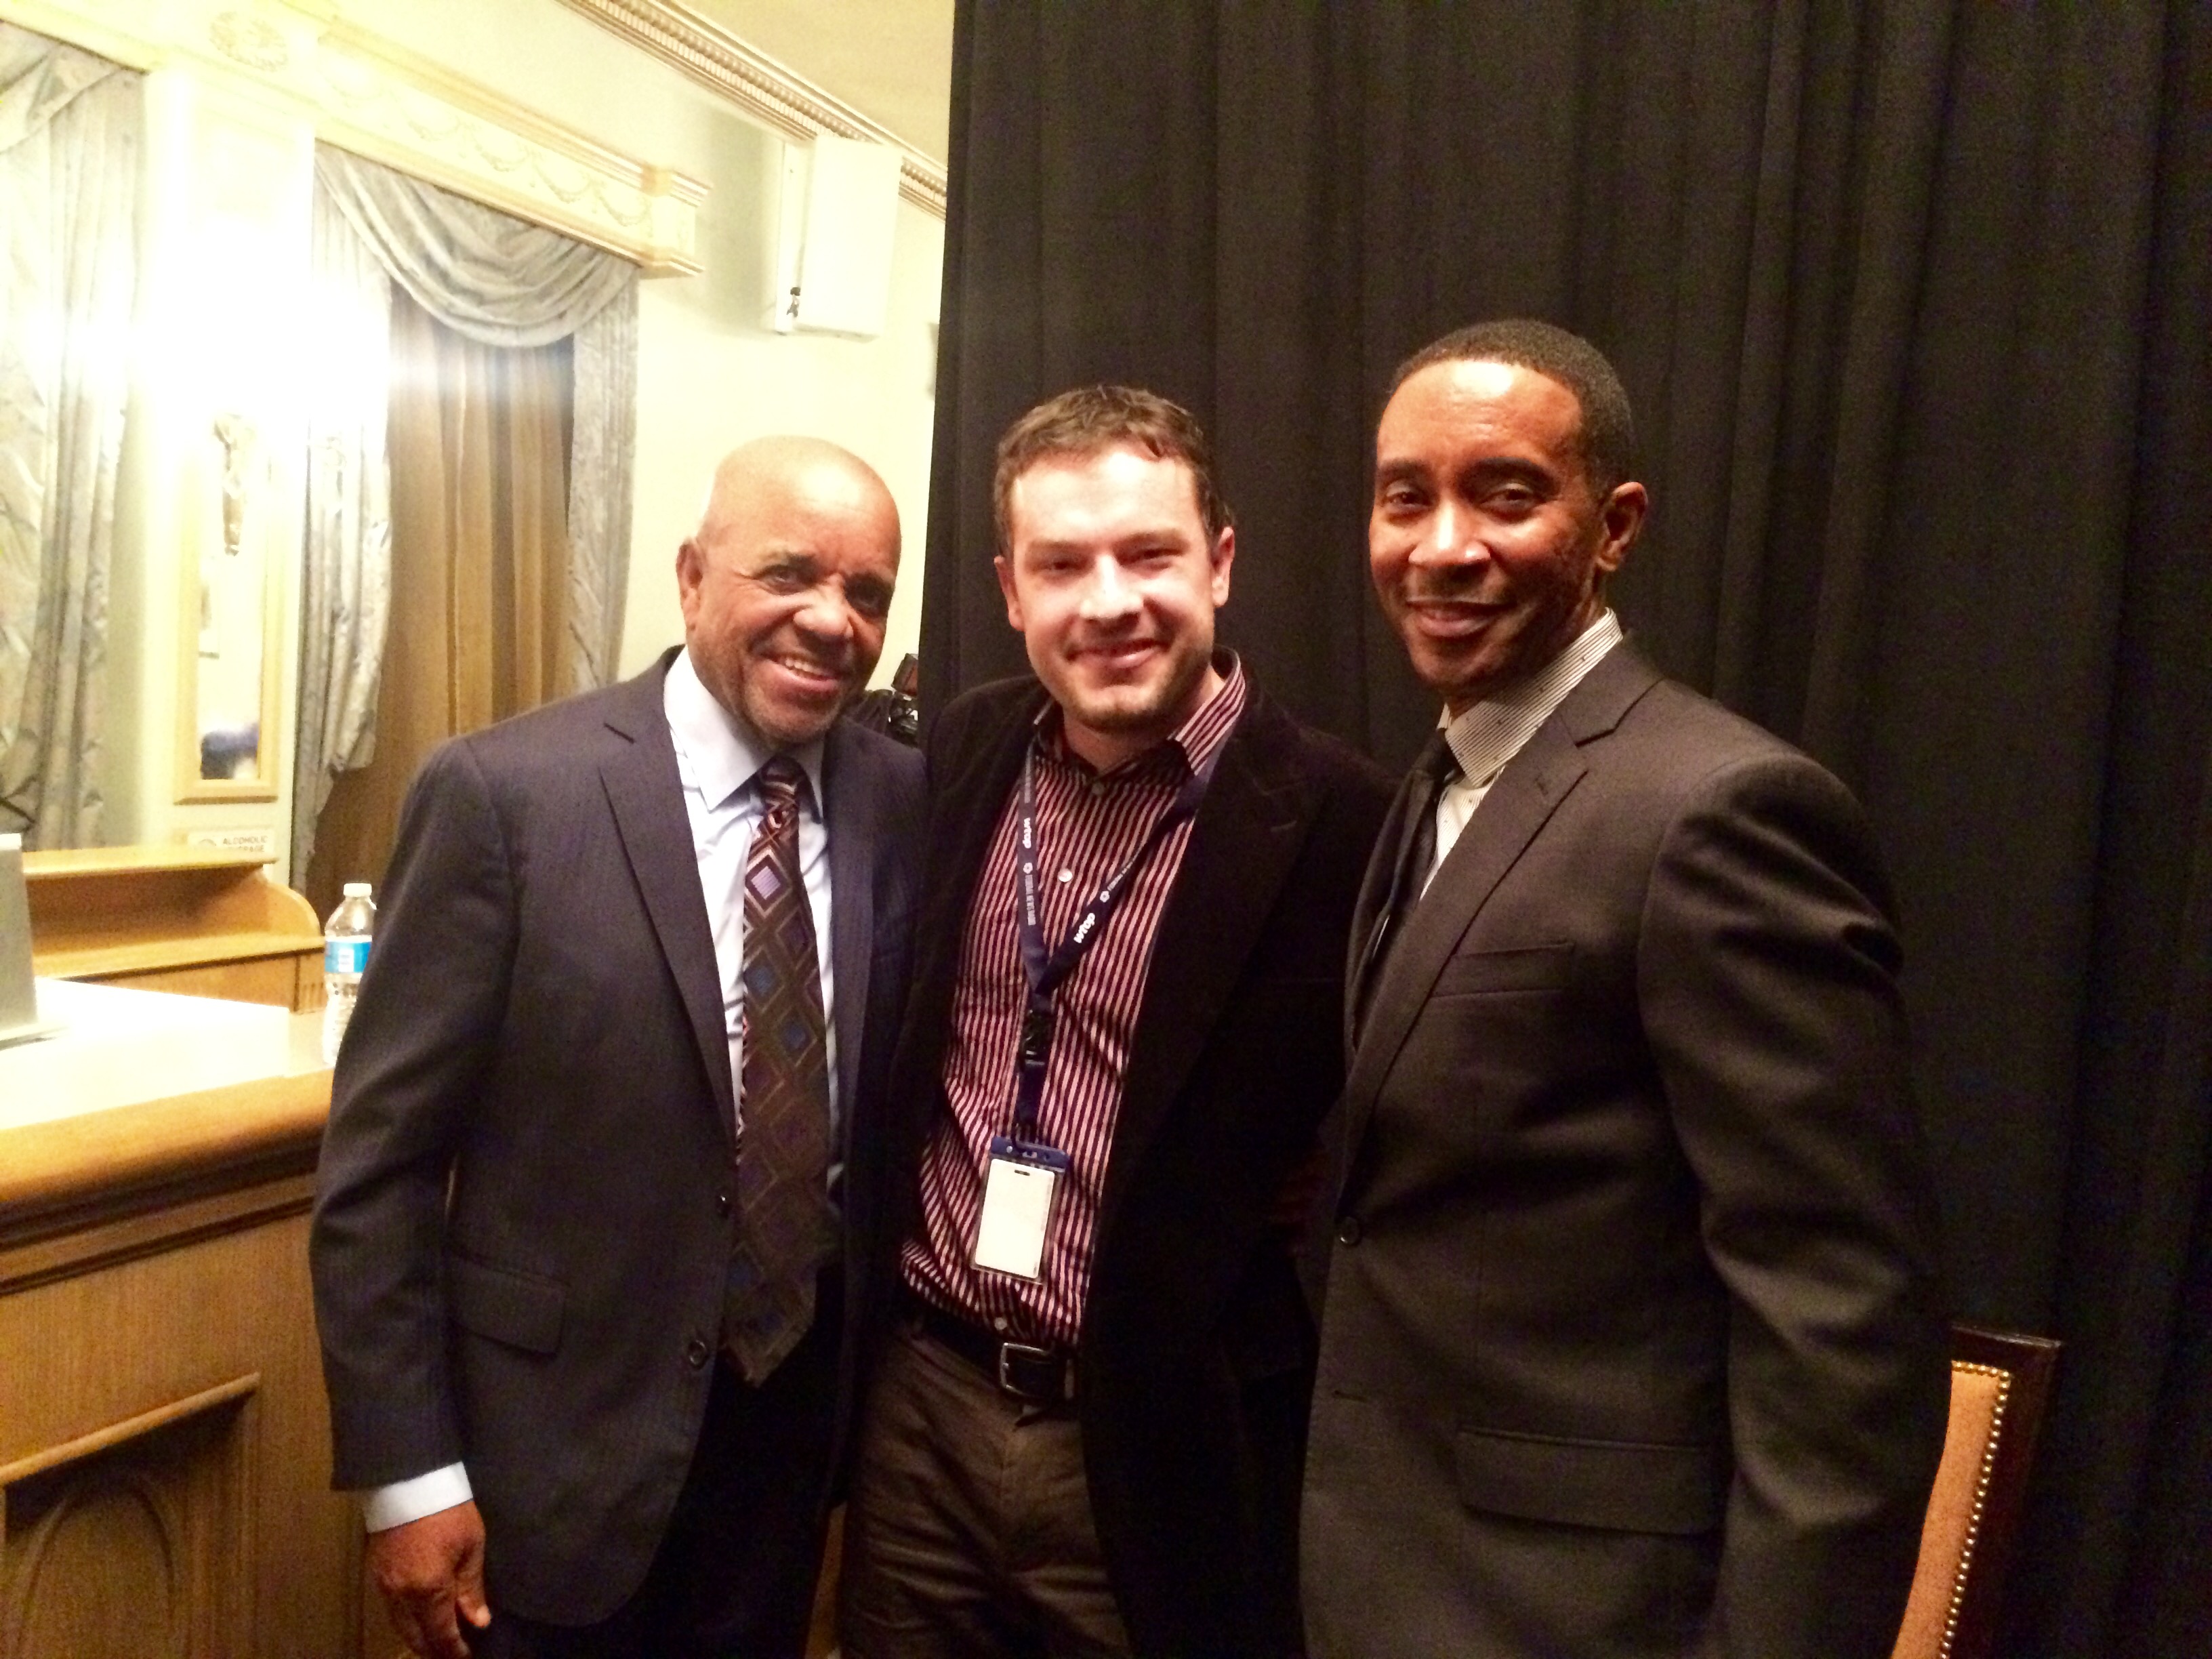 Motown founder Berry Gordy (left) and musical director Charles Randolph-Wright (right) pose with WTOP's Jason Fraley. (WTOP/Jason Fraley)